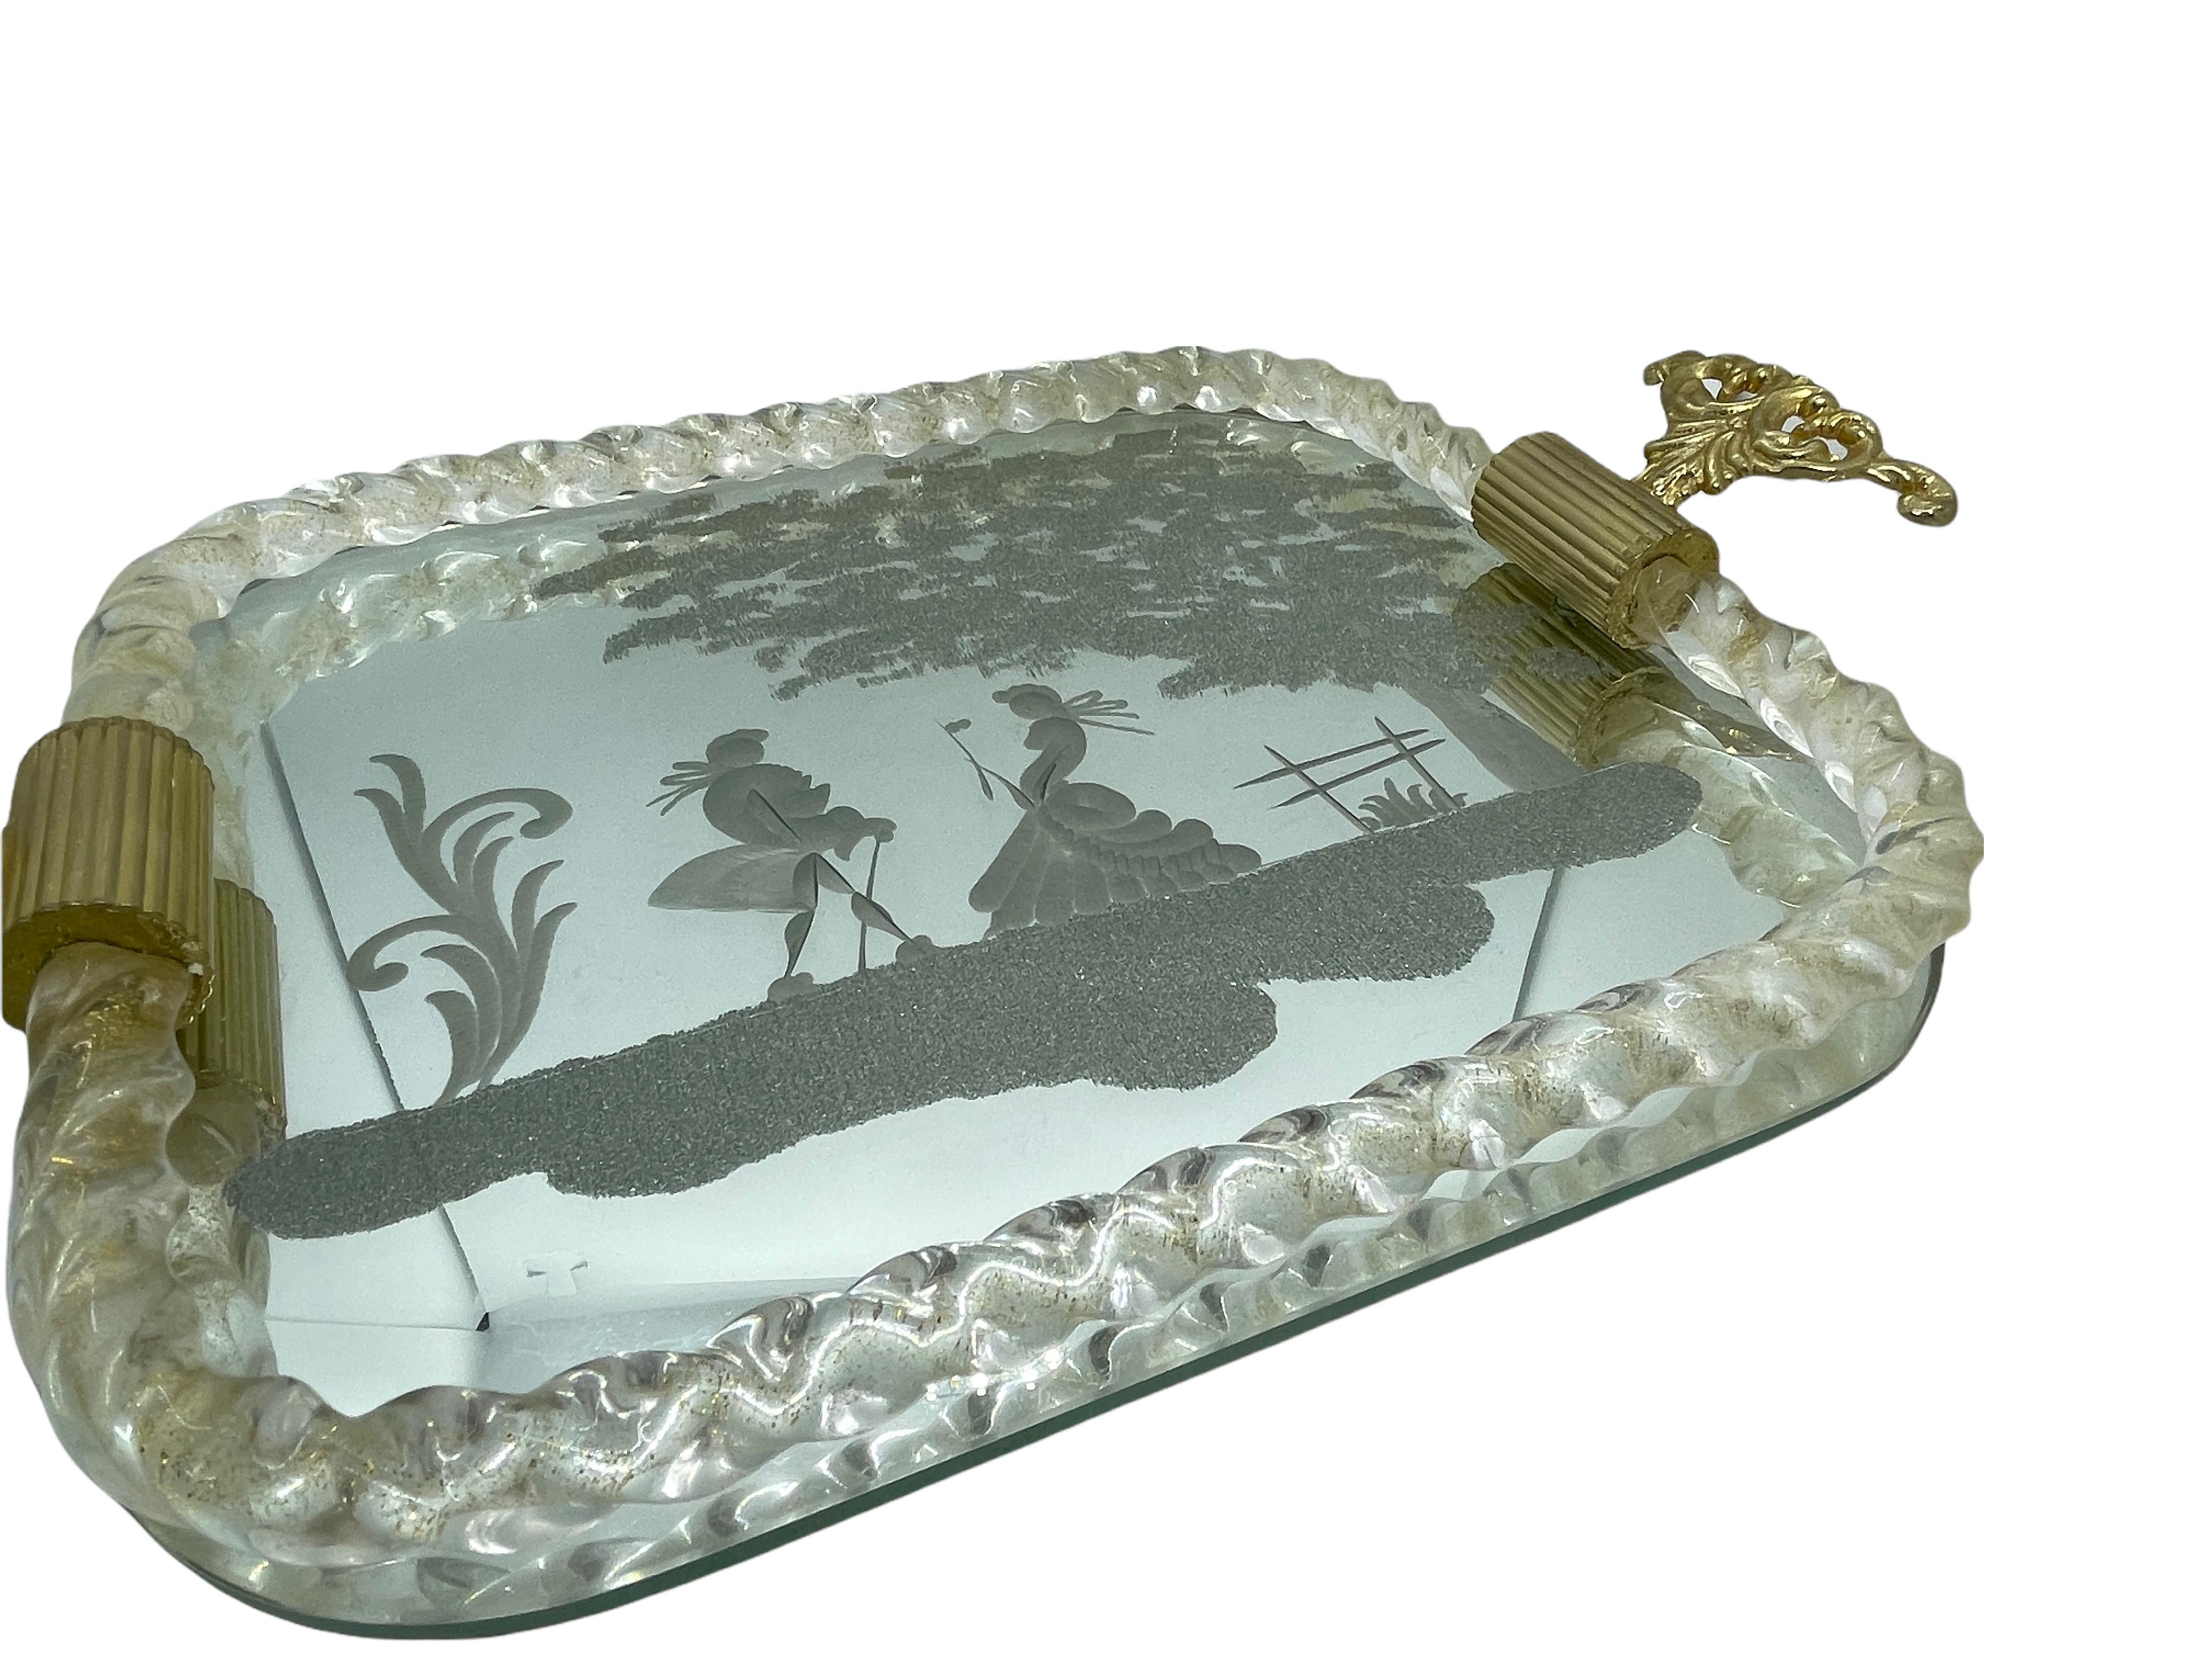 Hand-Crafted Etched Murano Glass Mirrored Tray by Ercole Barovier, Italy, 1960s